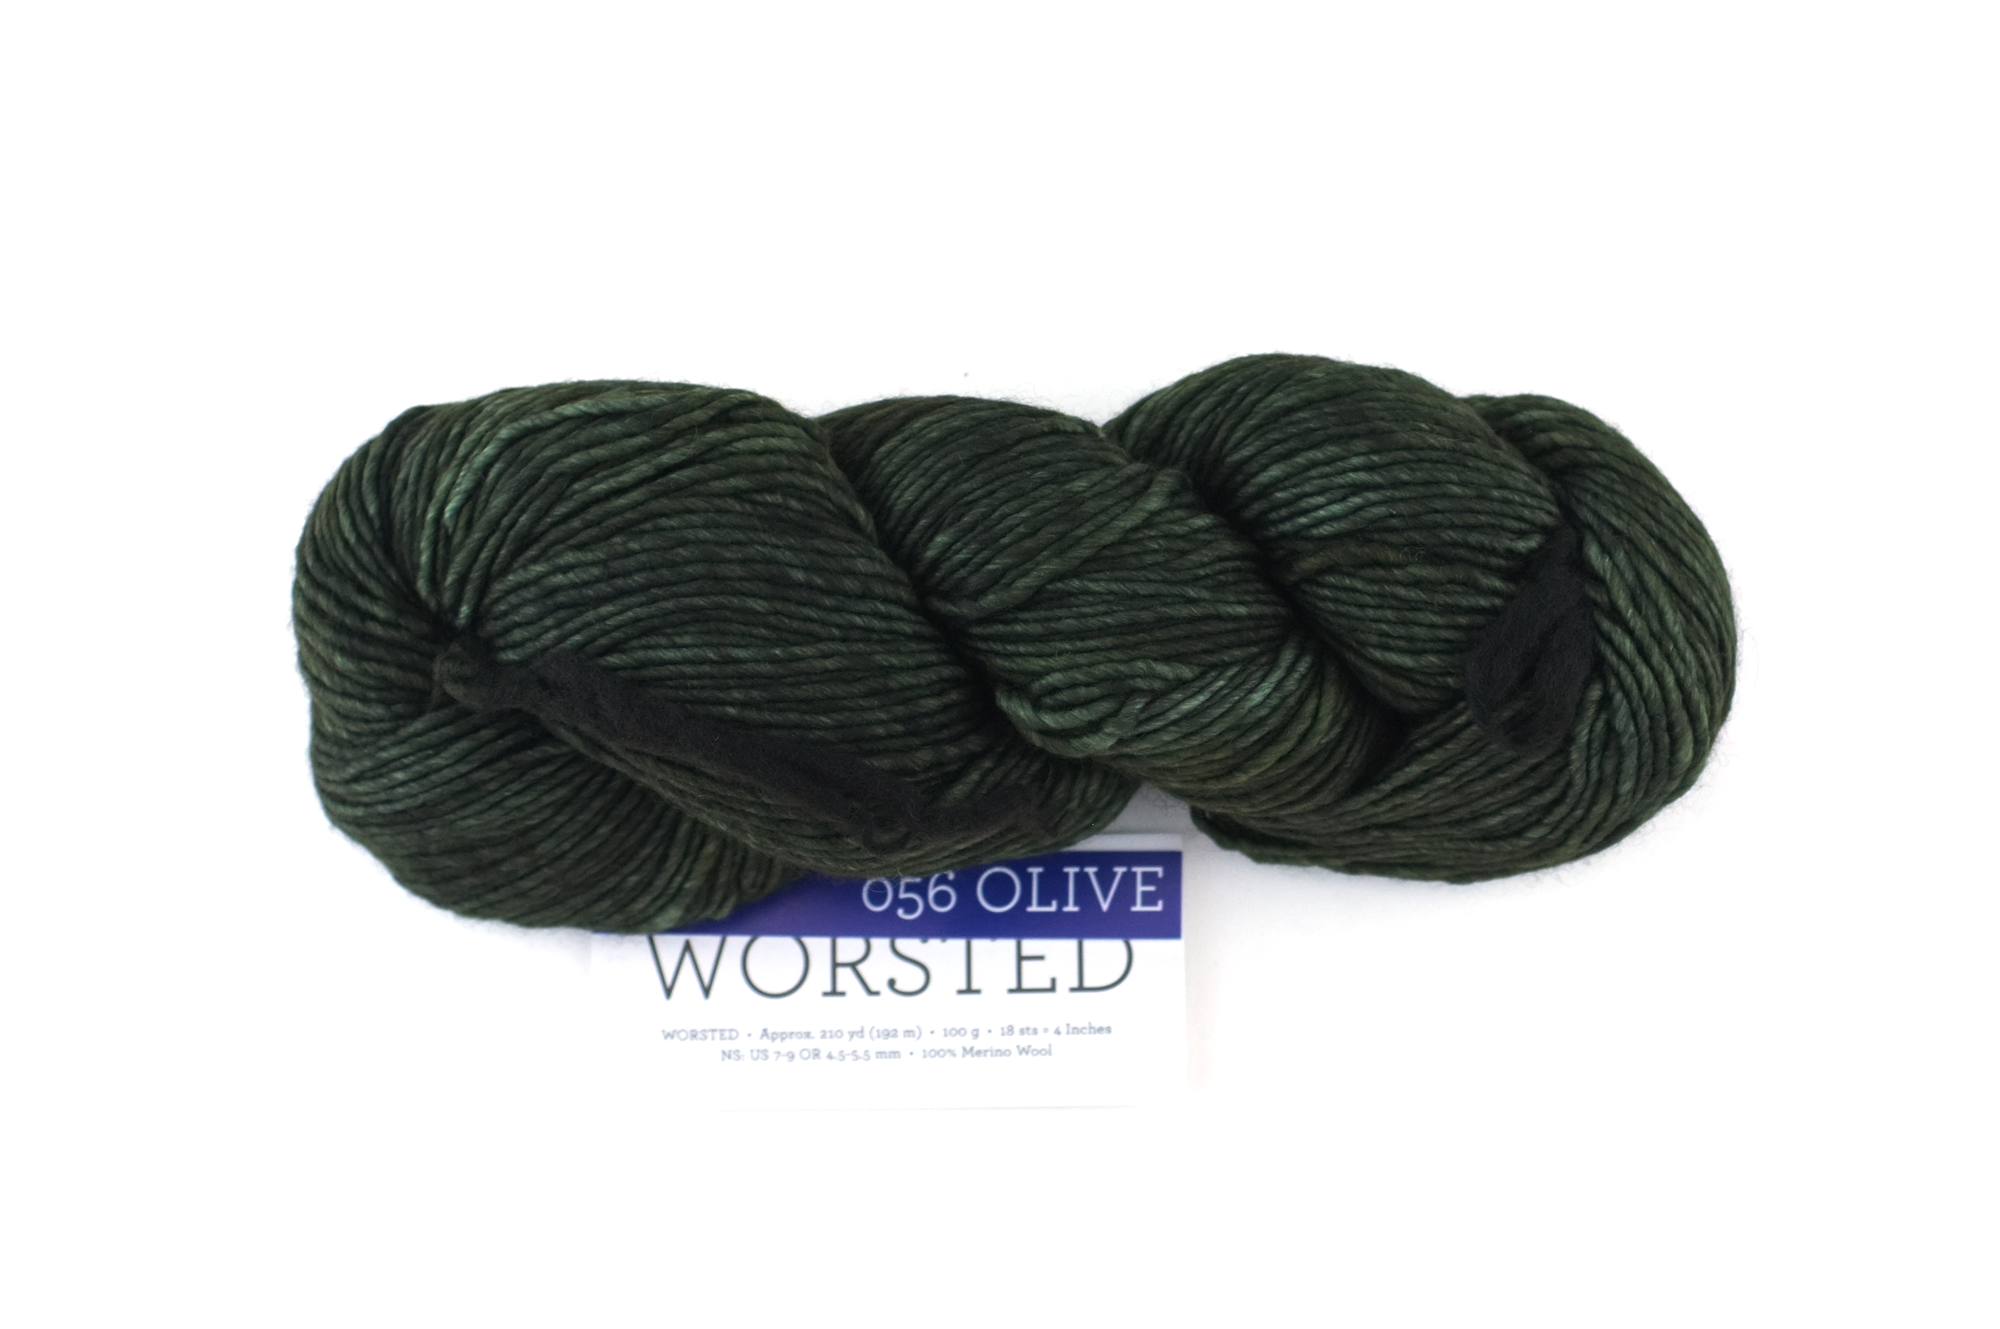 Malabrigo Worsted in color Olive, #056, Merino Wool Aran Weight Knitting  Yarn, deep olive green Red Beauty Textiles